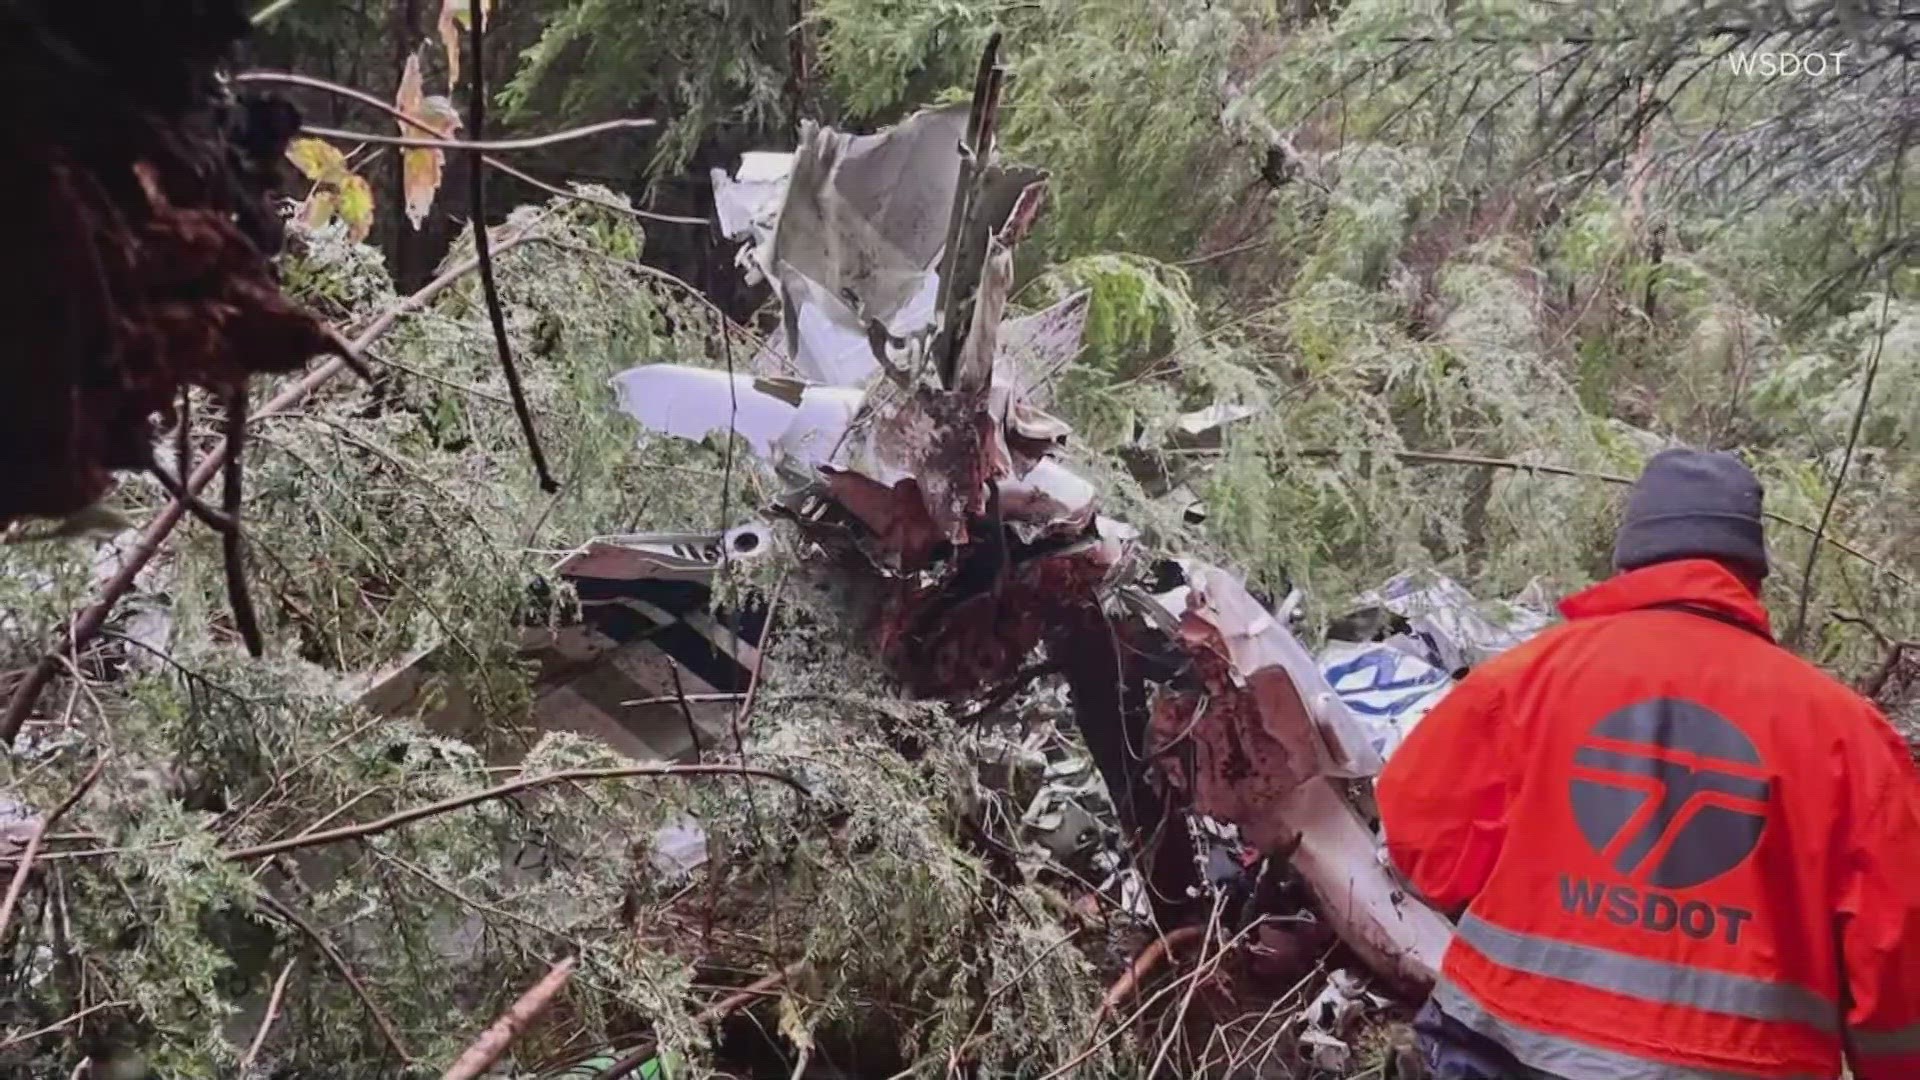 Air search and rescue crews found Rod Collen's plane in a forest near Queets on the Olympic Peninsula, where he was believed to have gone down over a month ago.